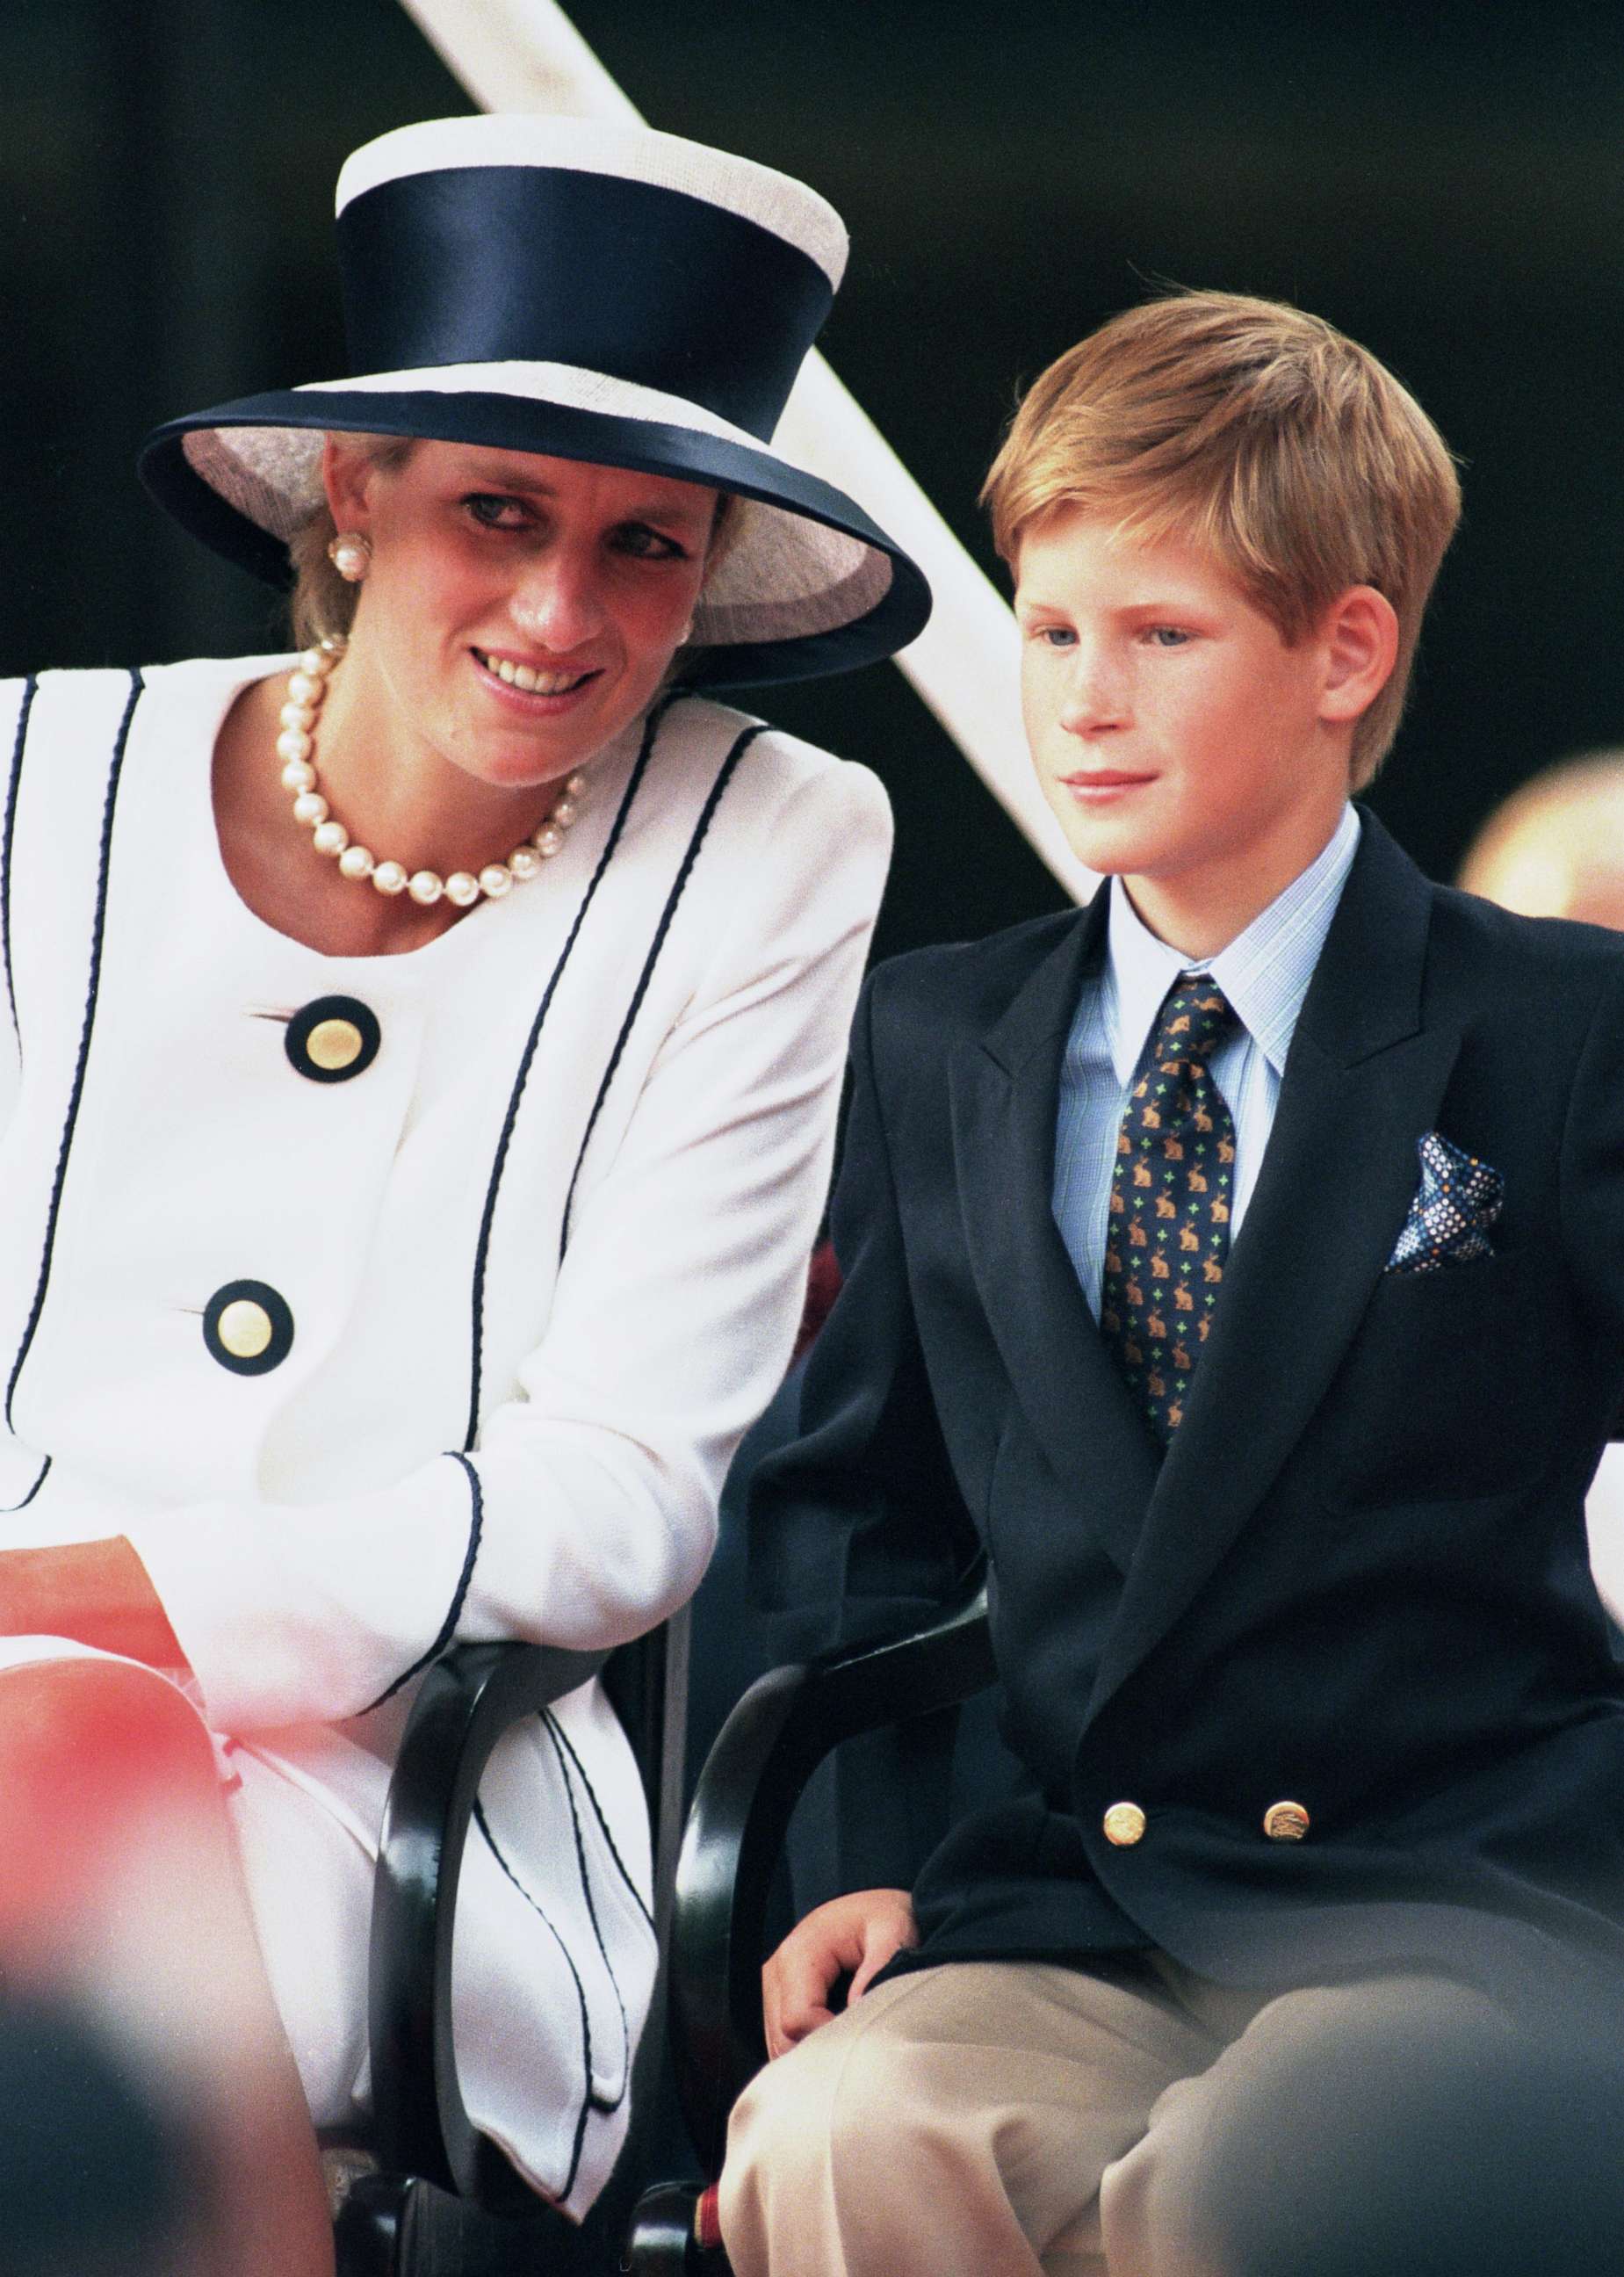 PHOTO: Diana, Princess Of Wales sits with Prince Harry while attending the 50th anniversary celebrations for VJ Day in London, Aug, 19, 1995.